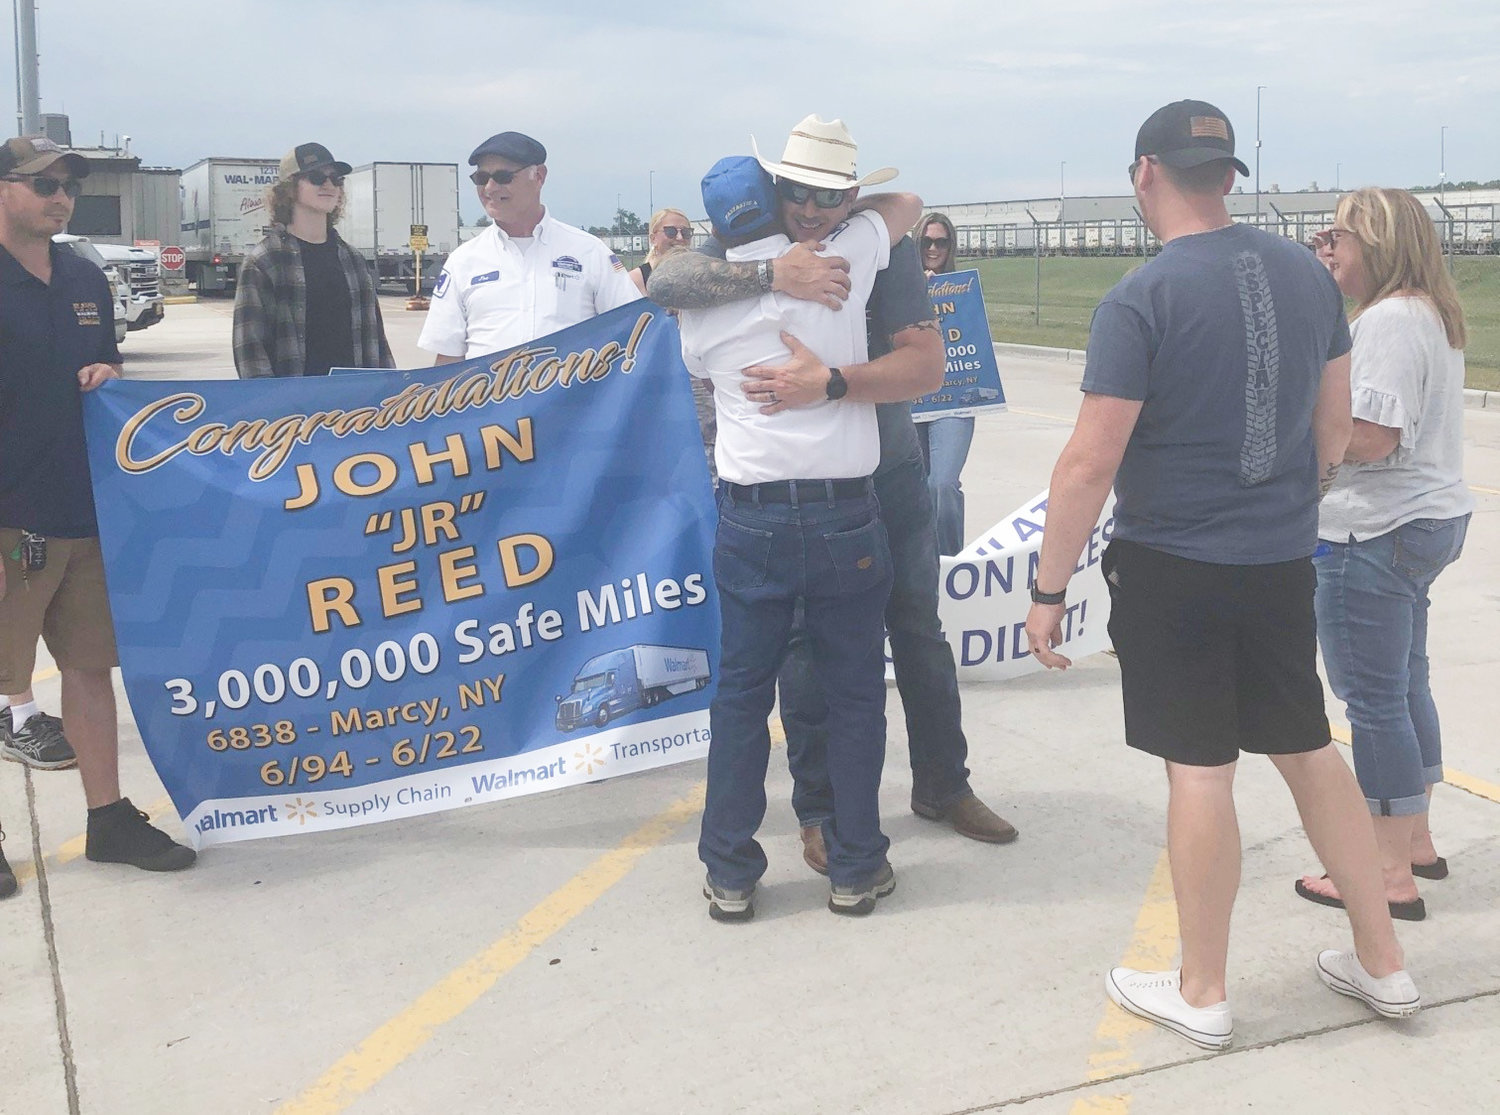 Walmart celebrated and congratulated one of its Distribution Center drivers for driving three million miles safely over the course of his 28 year career. Pictured is John Reed in white, receiving a hug from his son.